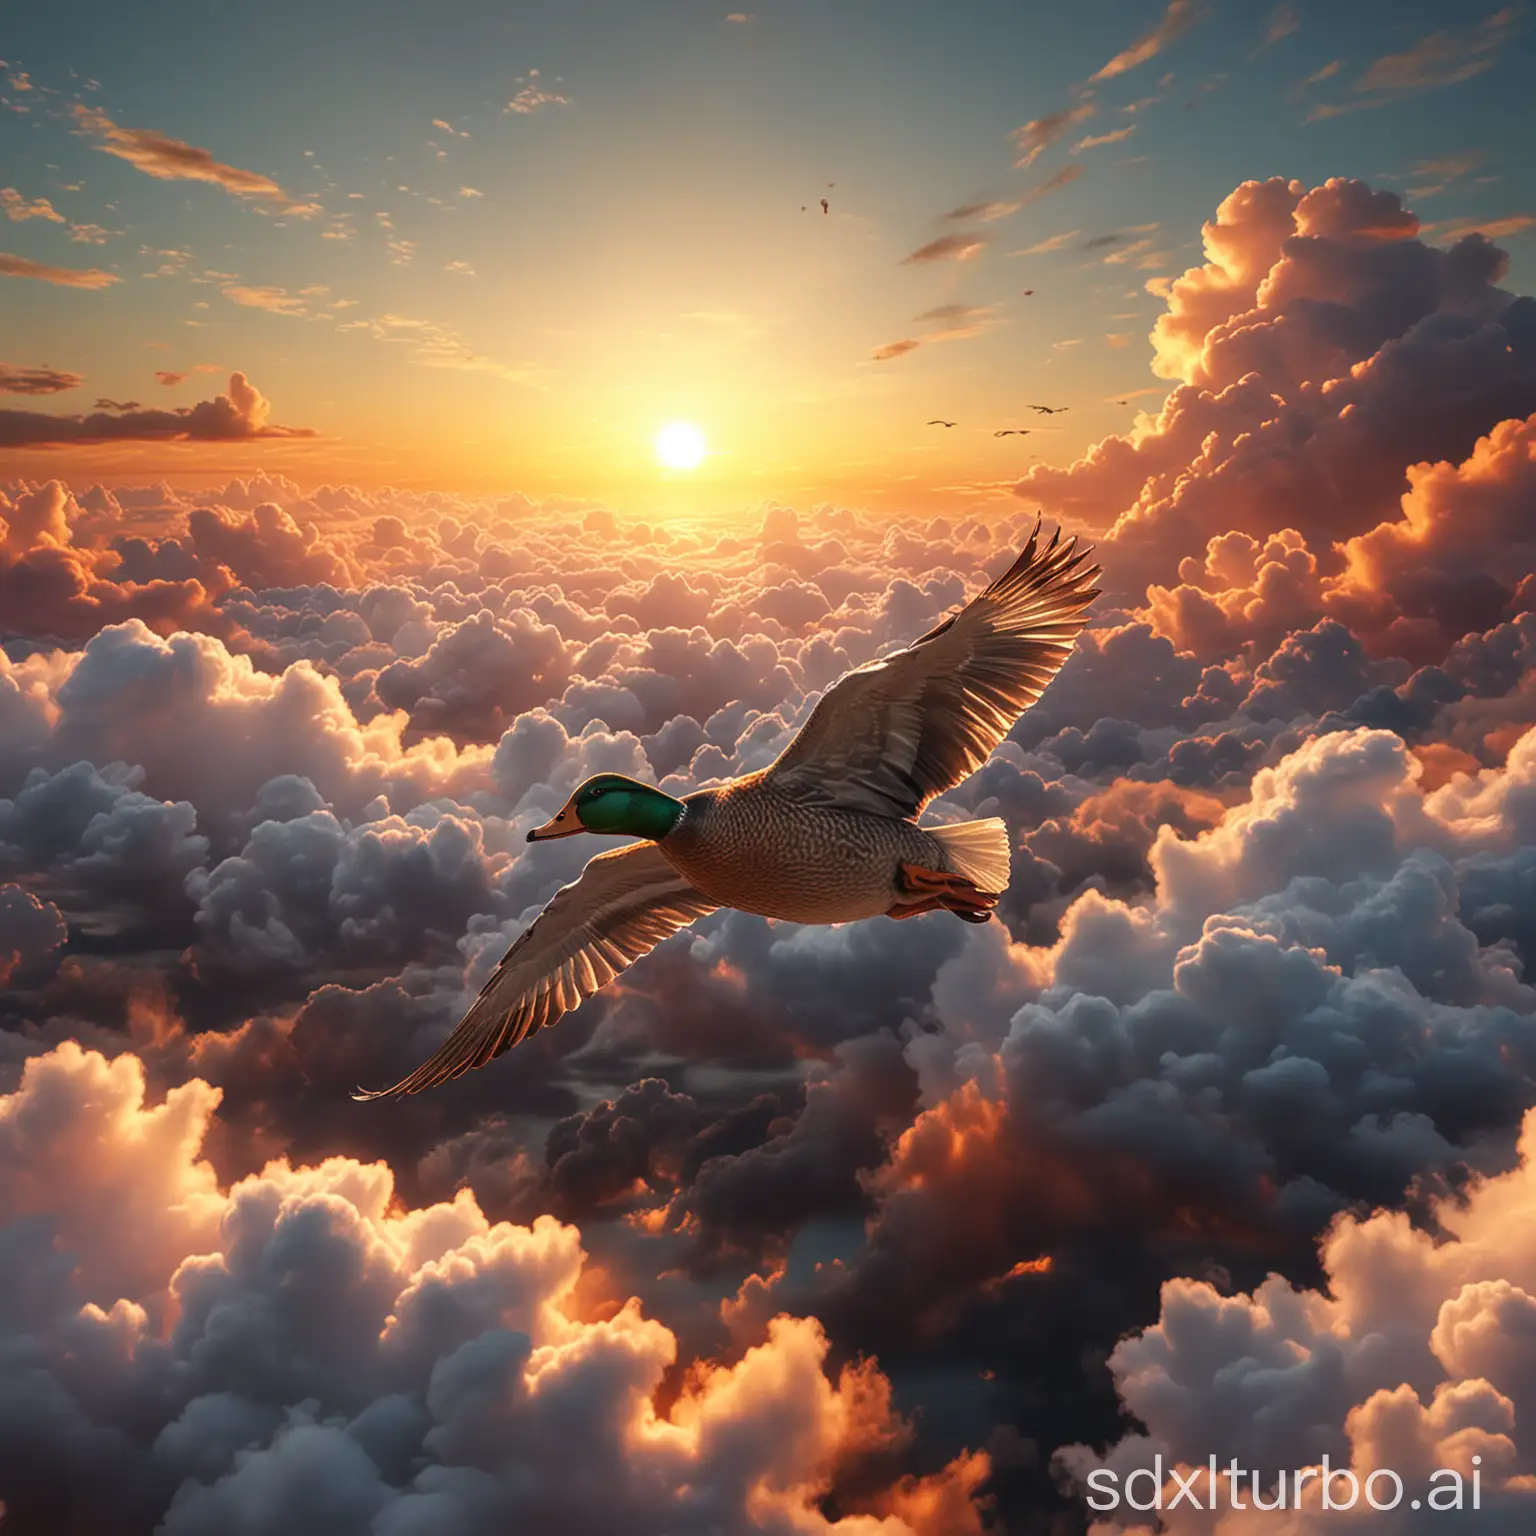 A duck glides on clouds towards sunset in a realistic image